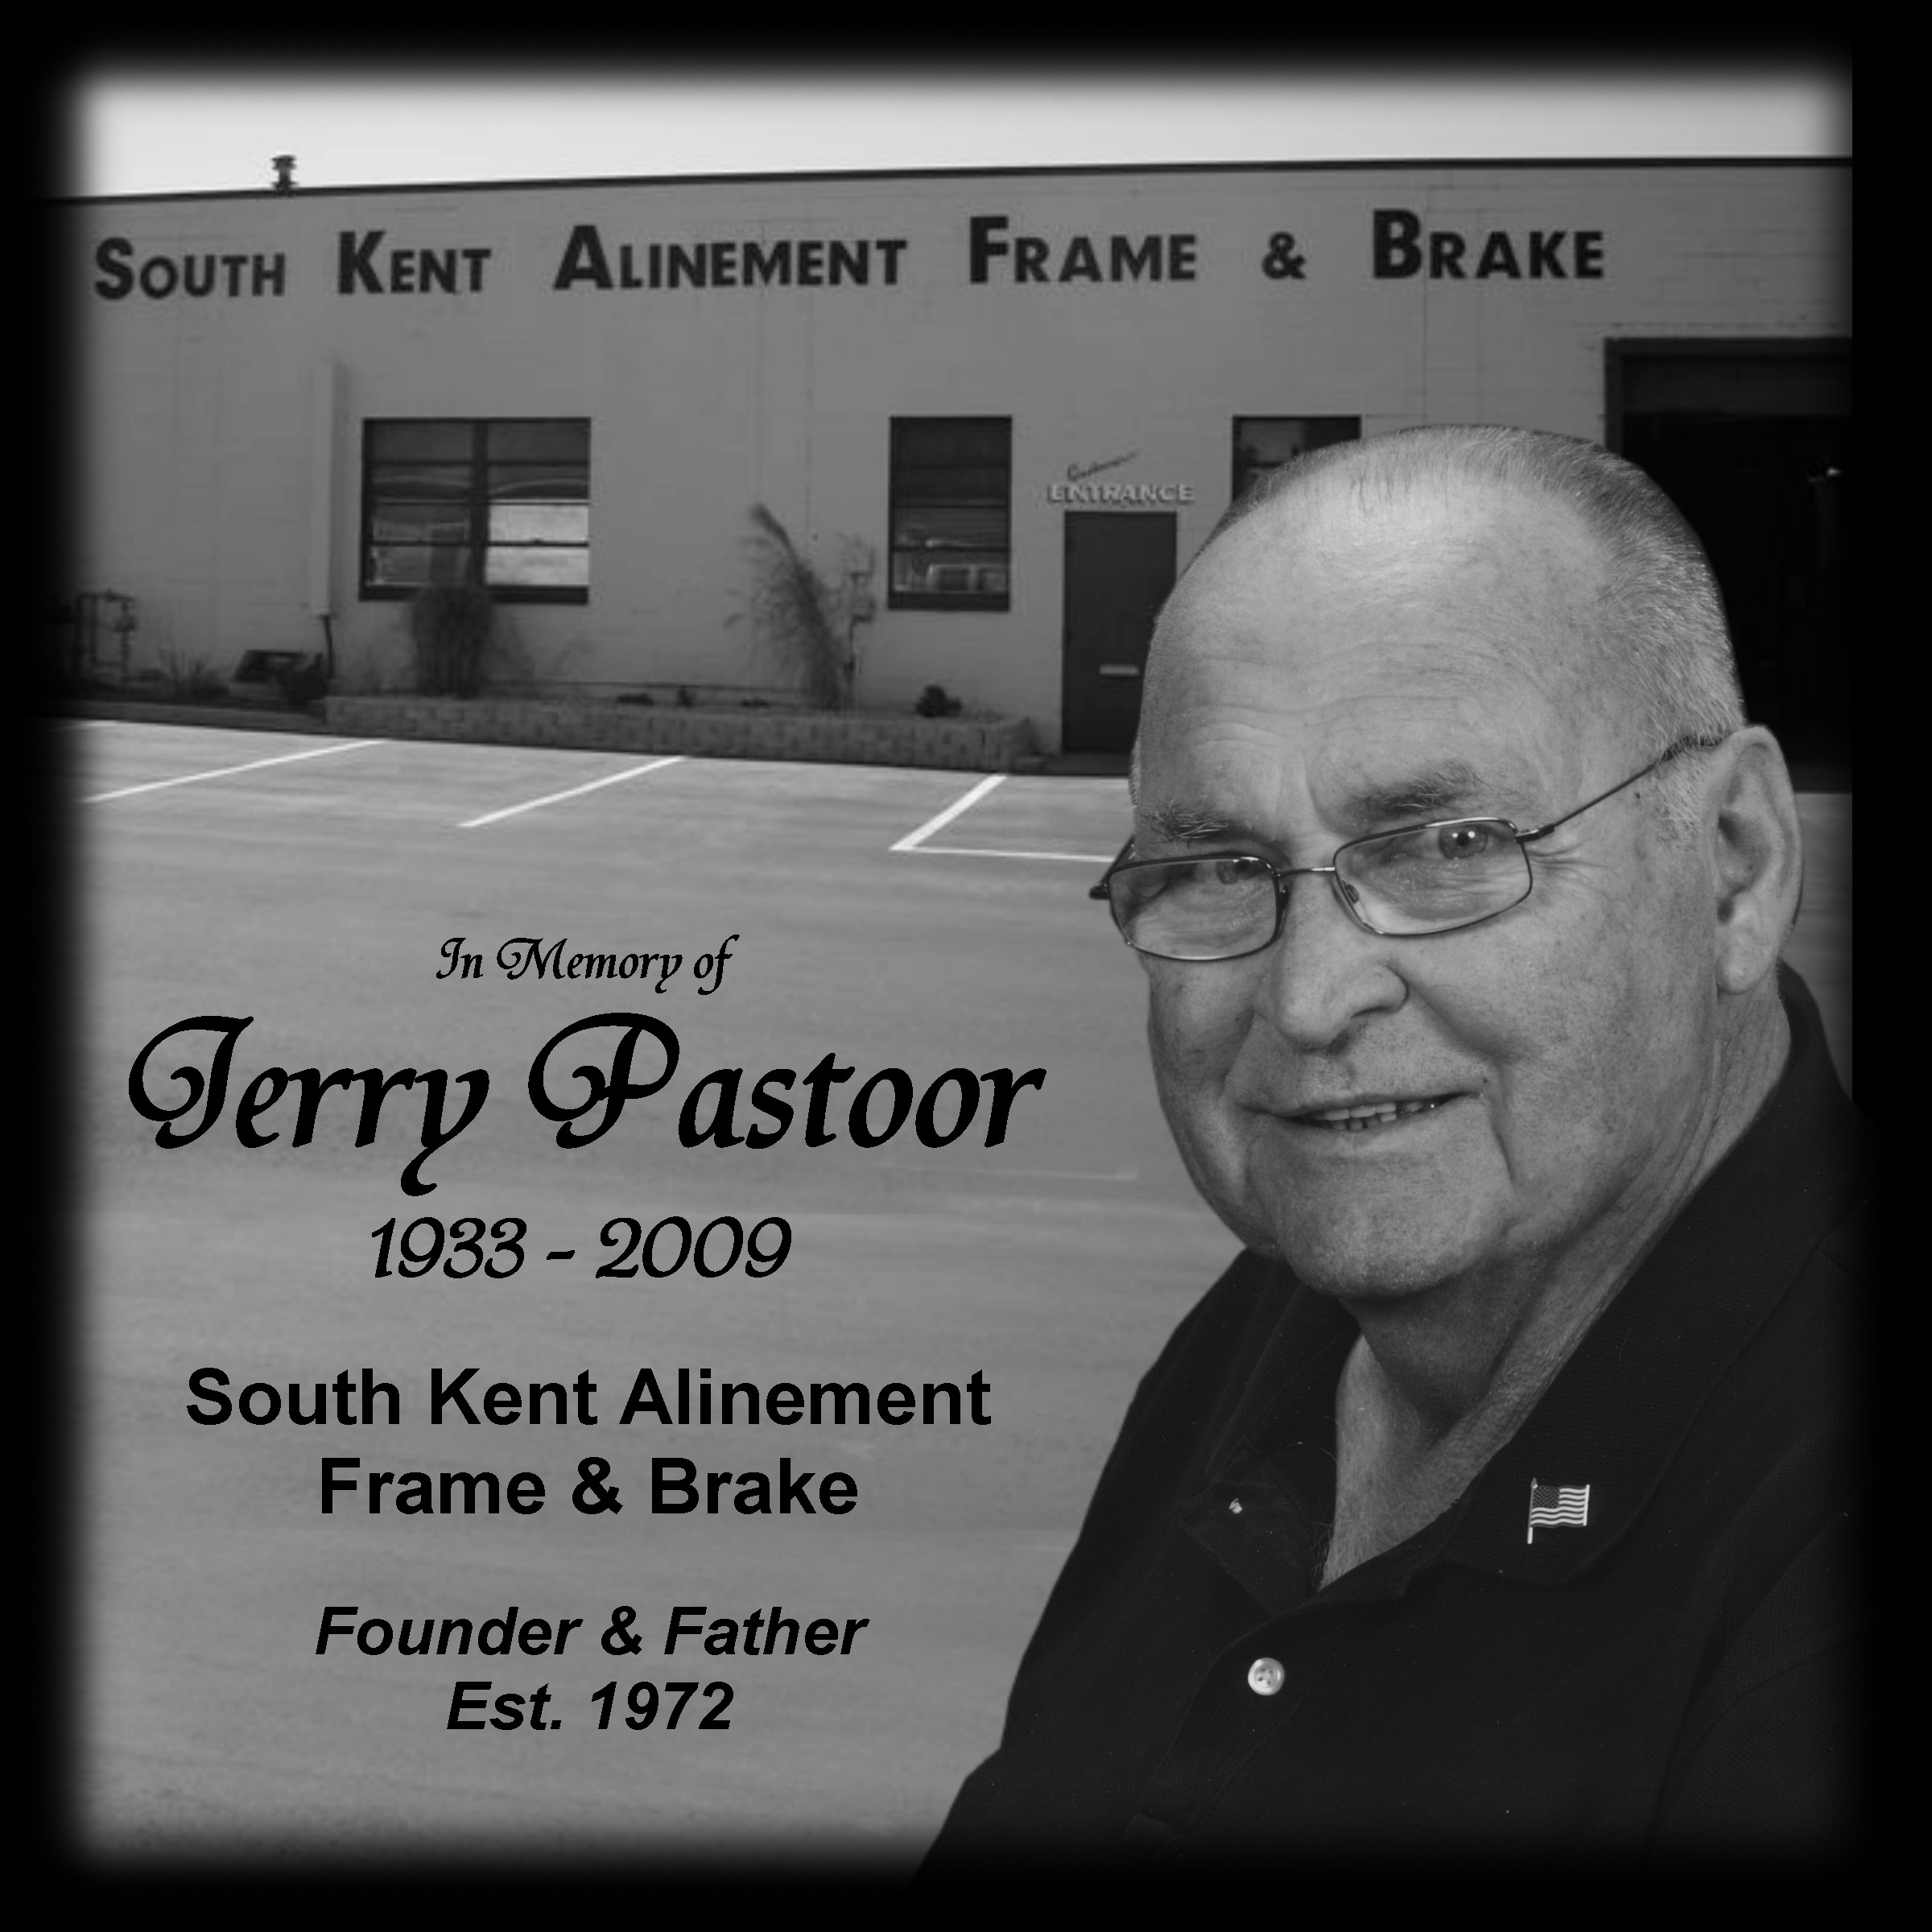 Jerry Pastoor South Kent Alignment Founder